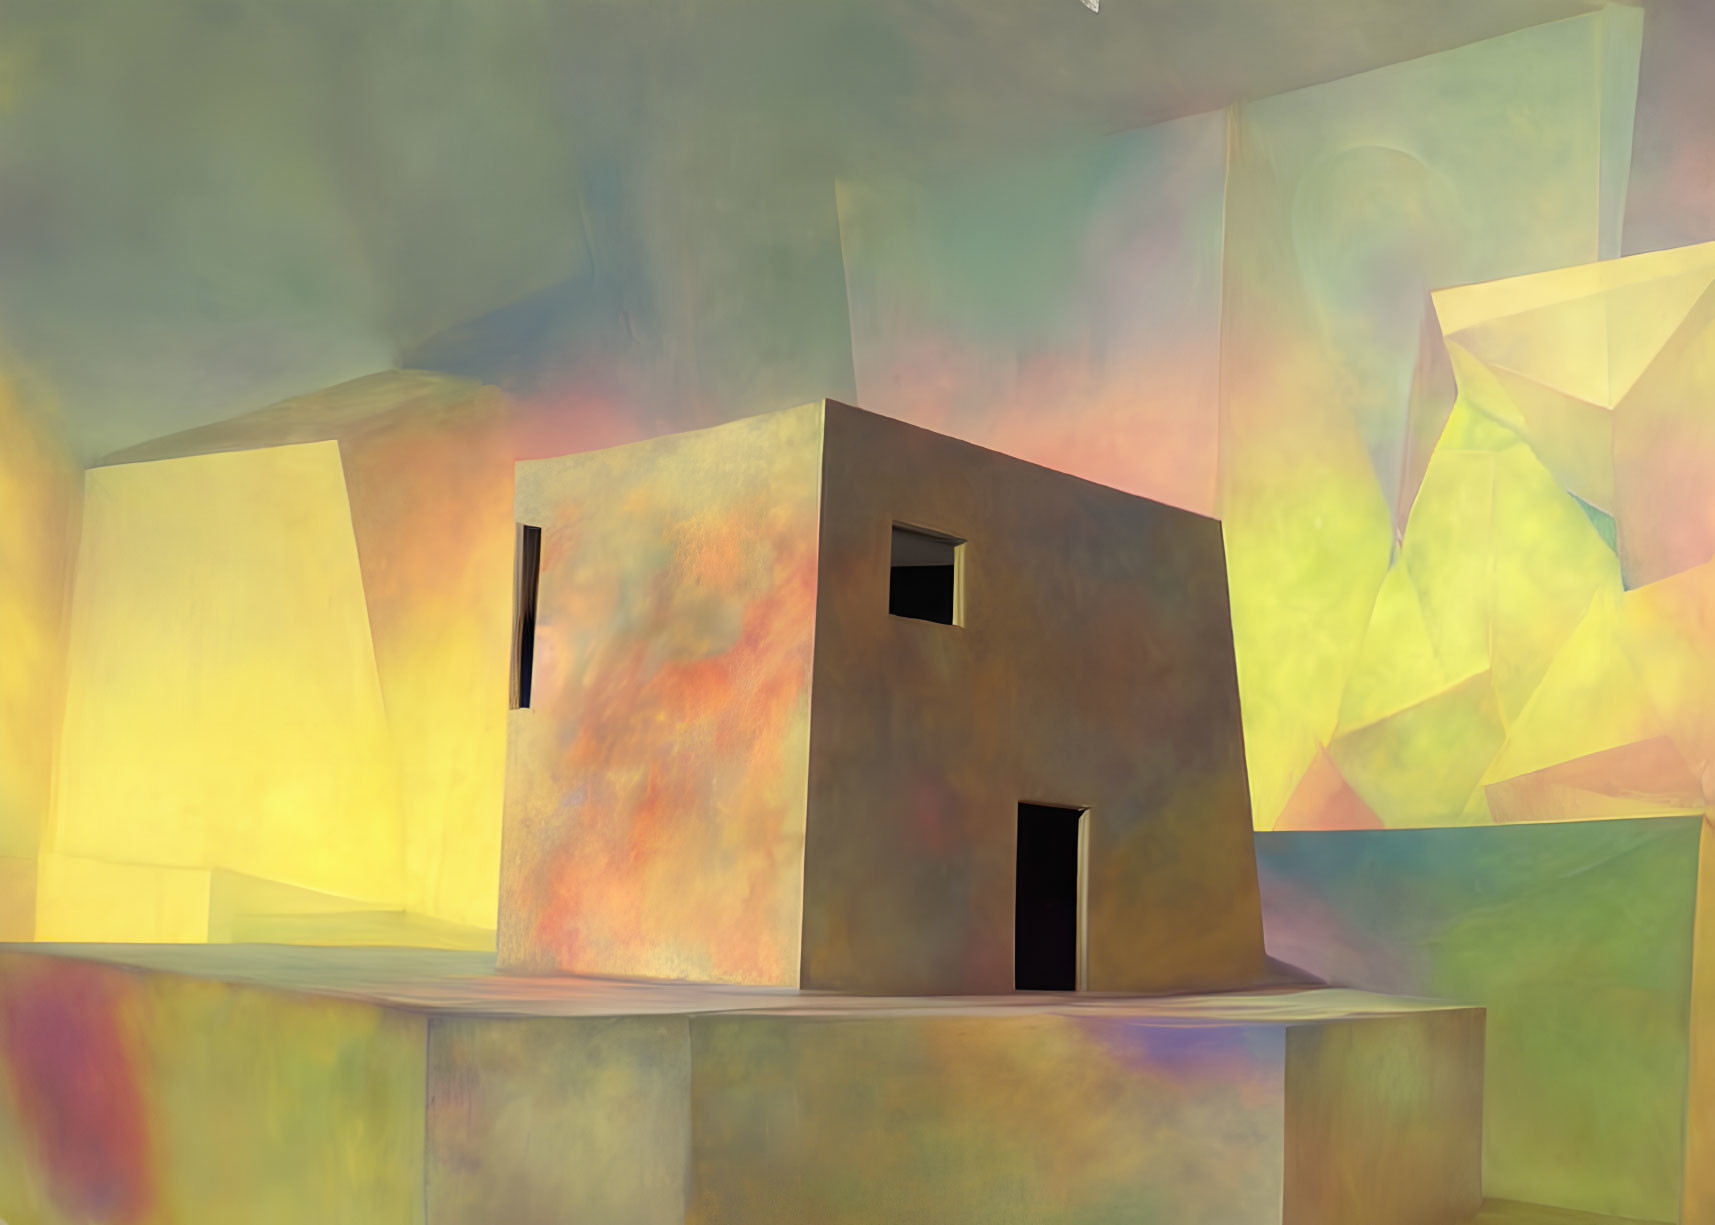 Geometric structure resembling a house in abstract painting.